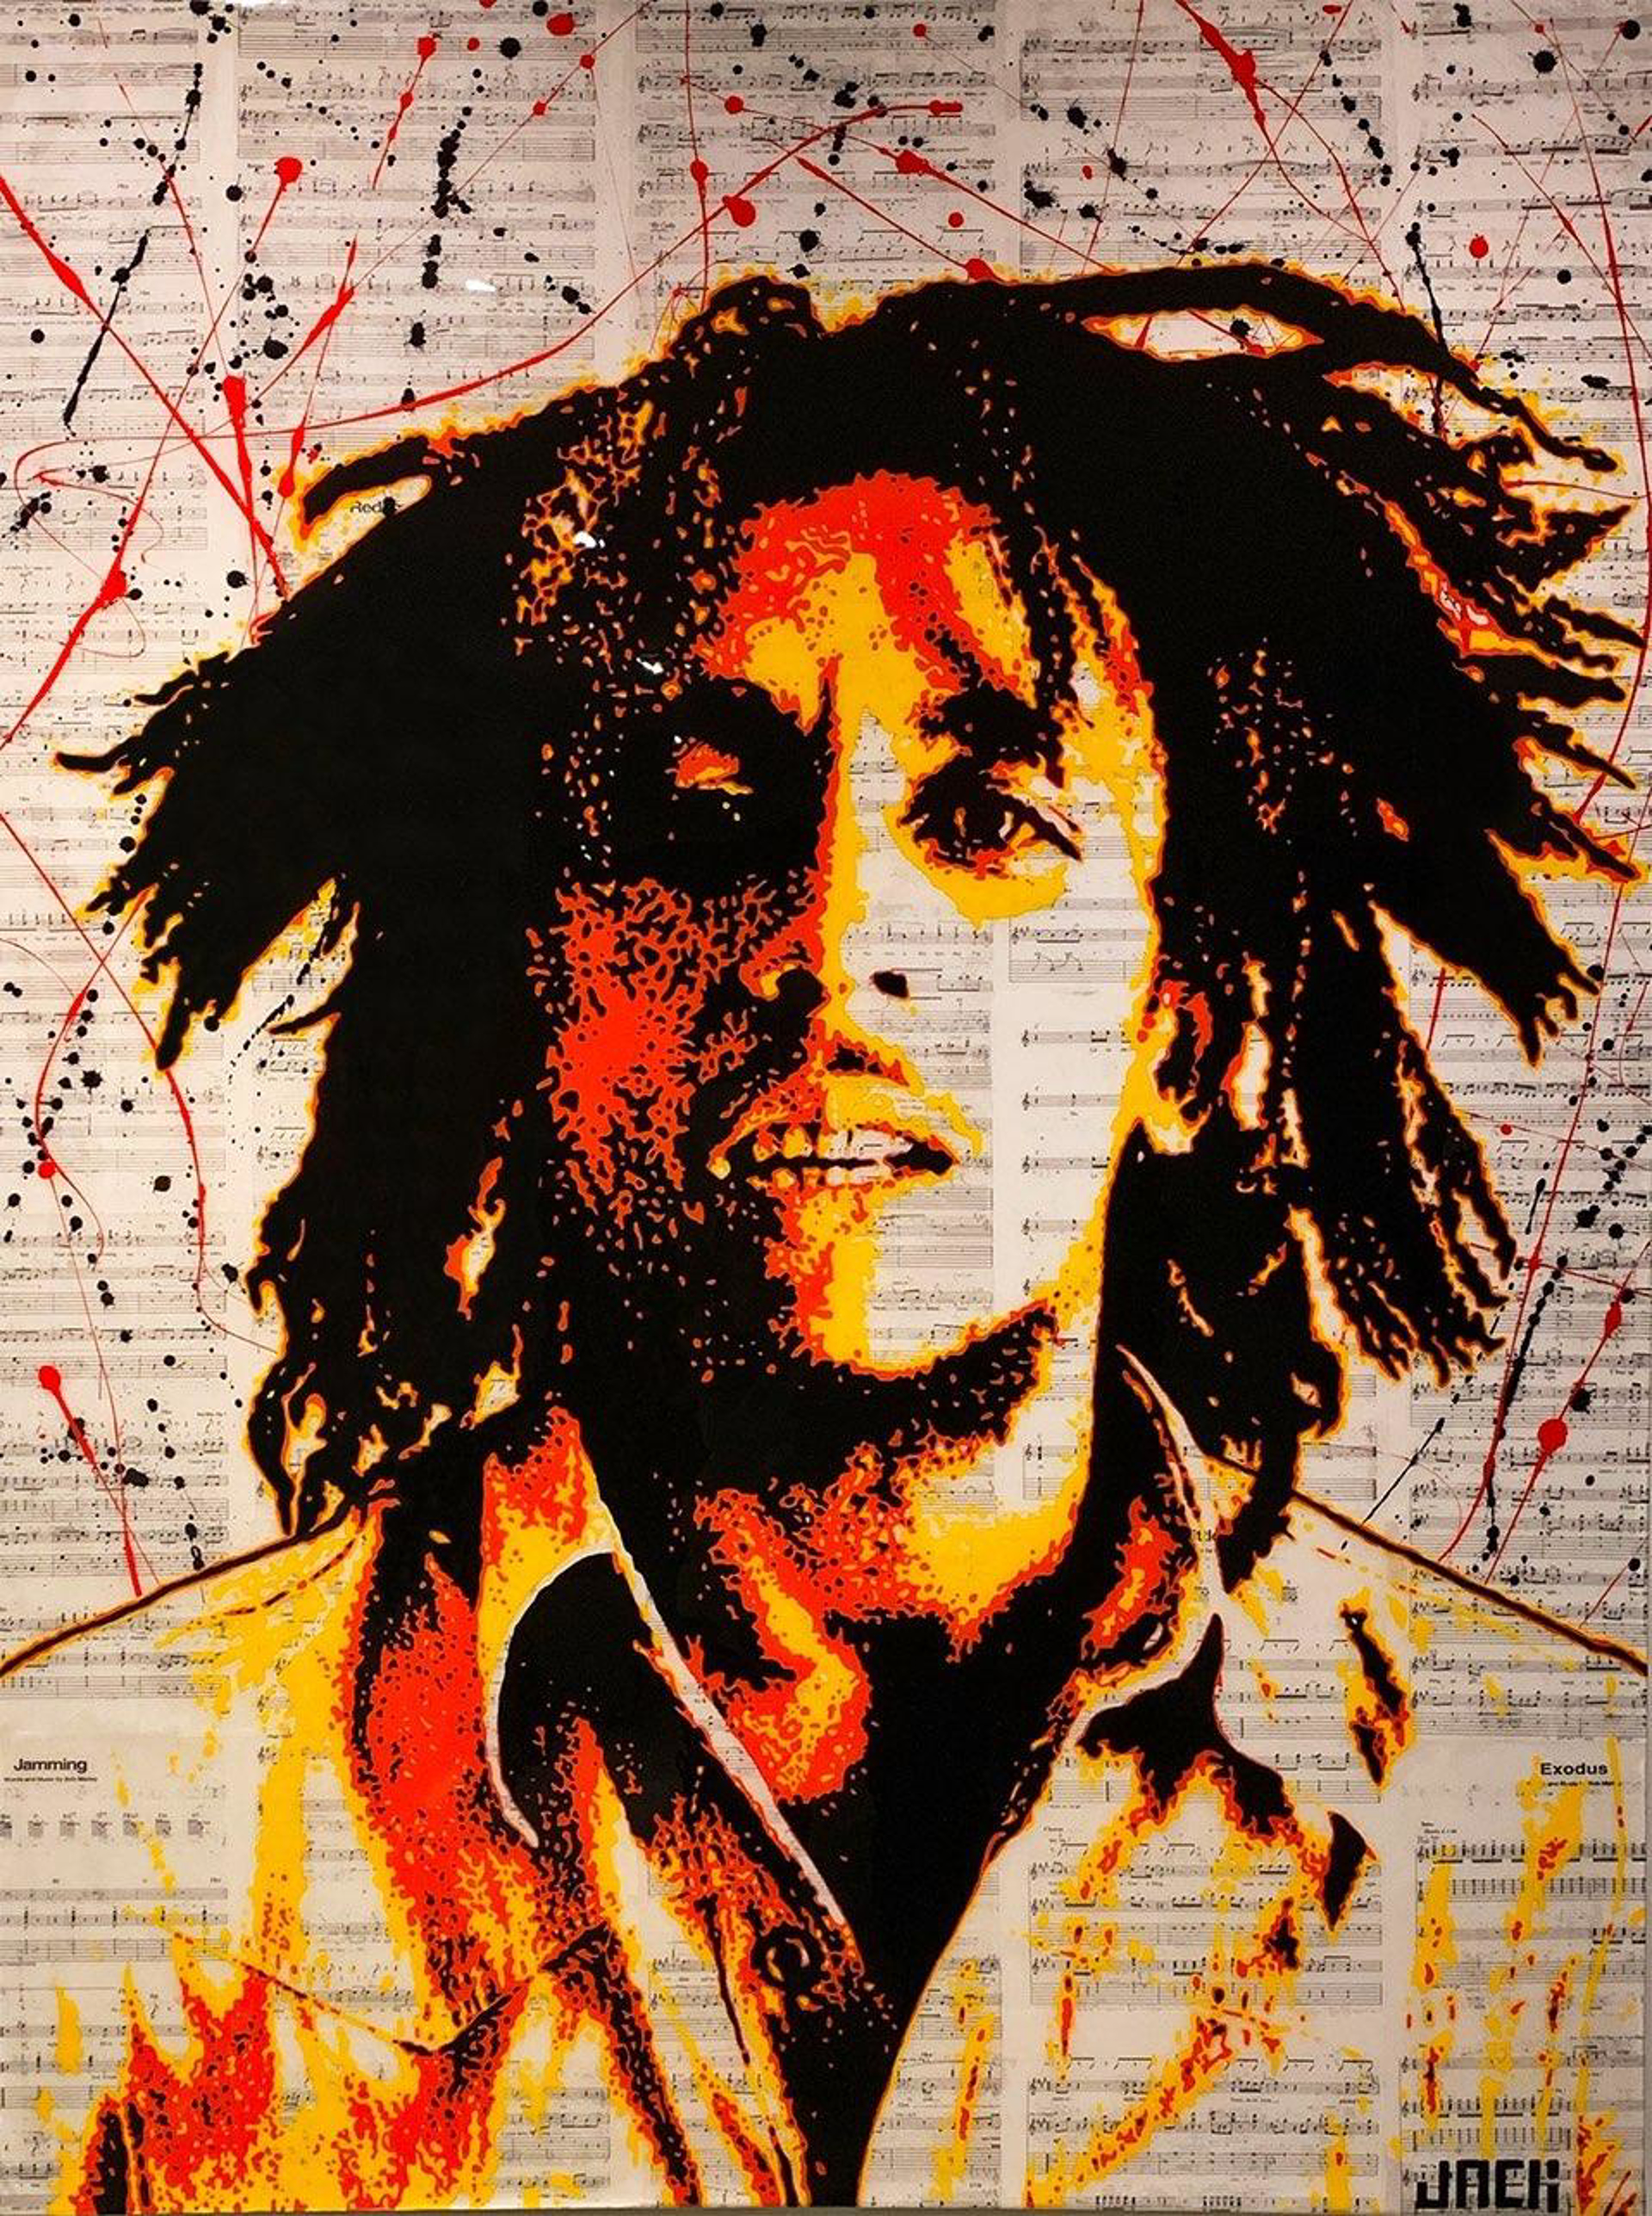 SOLD - Bob Marley - Commission available by Jack Florczyk